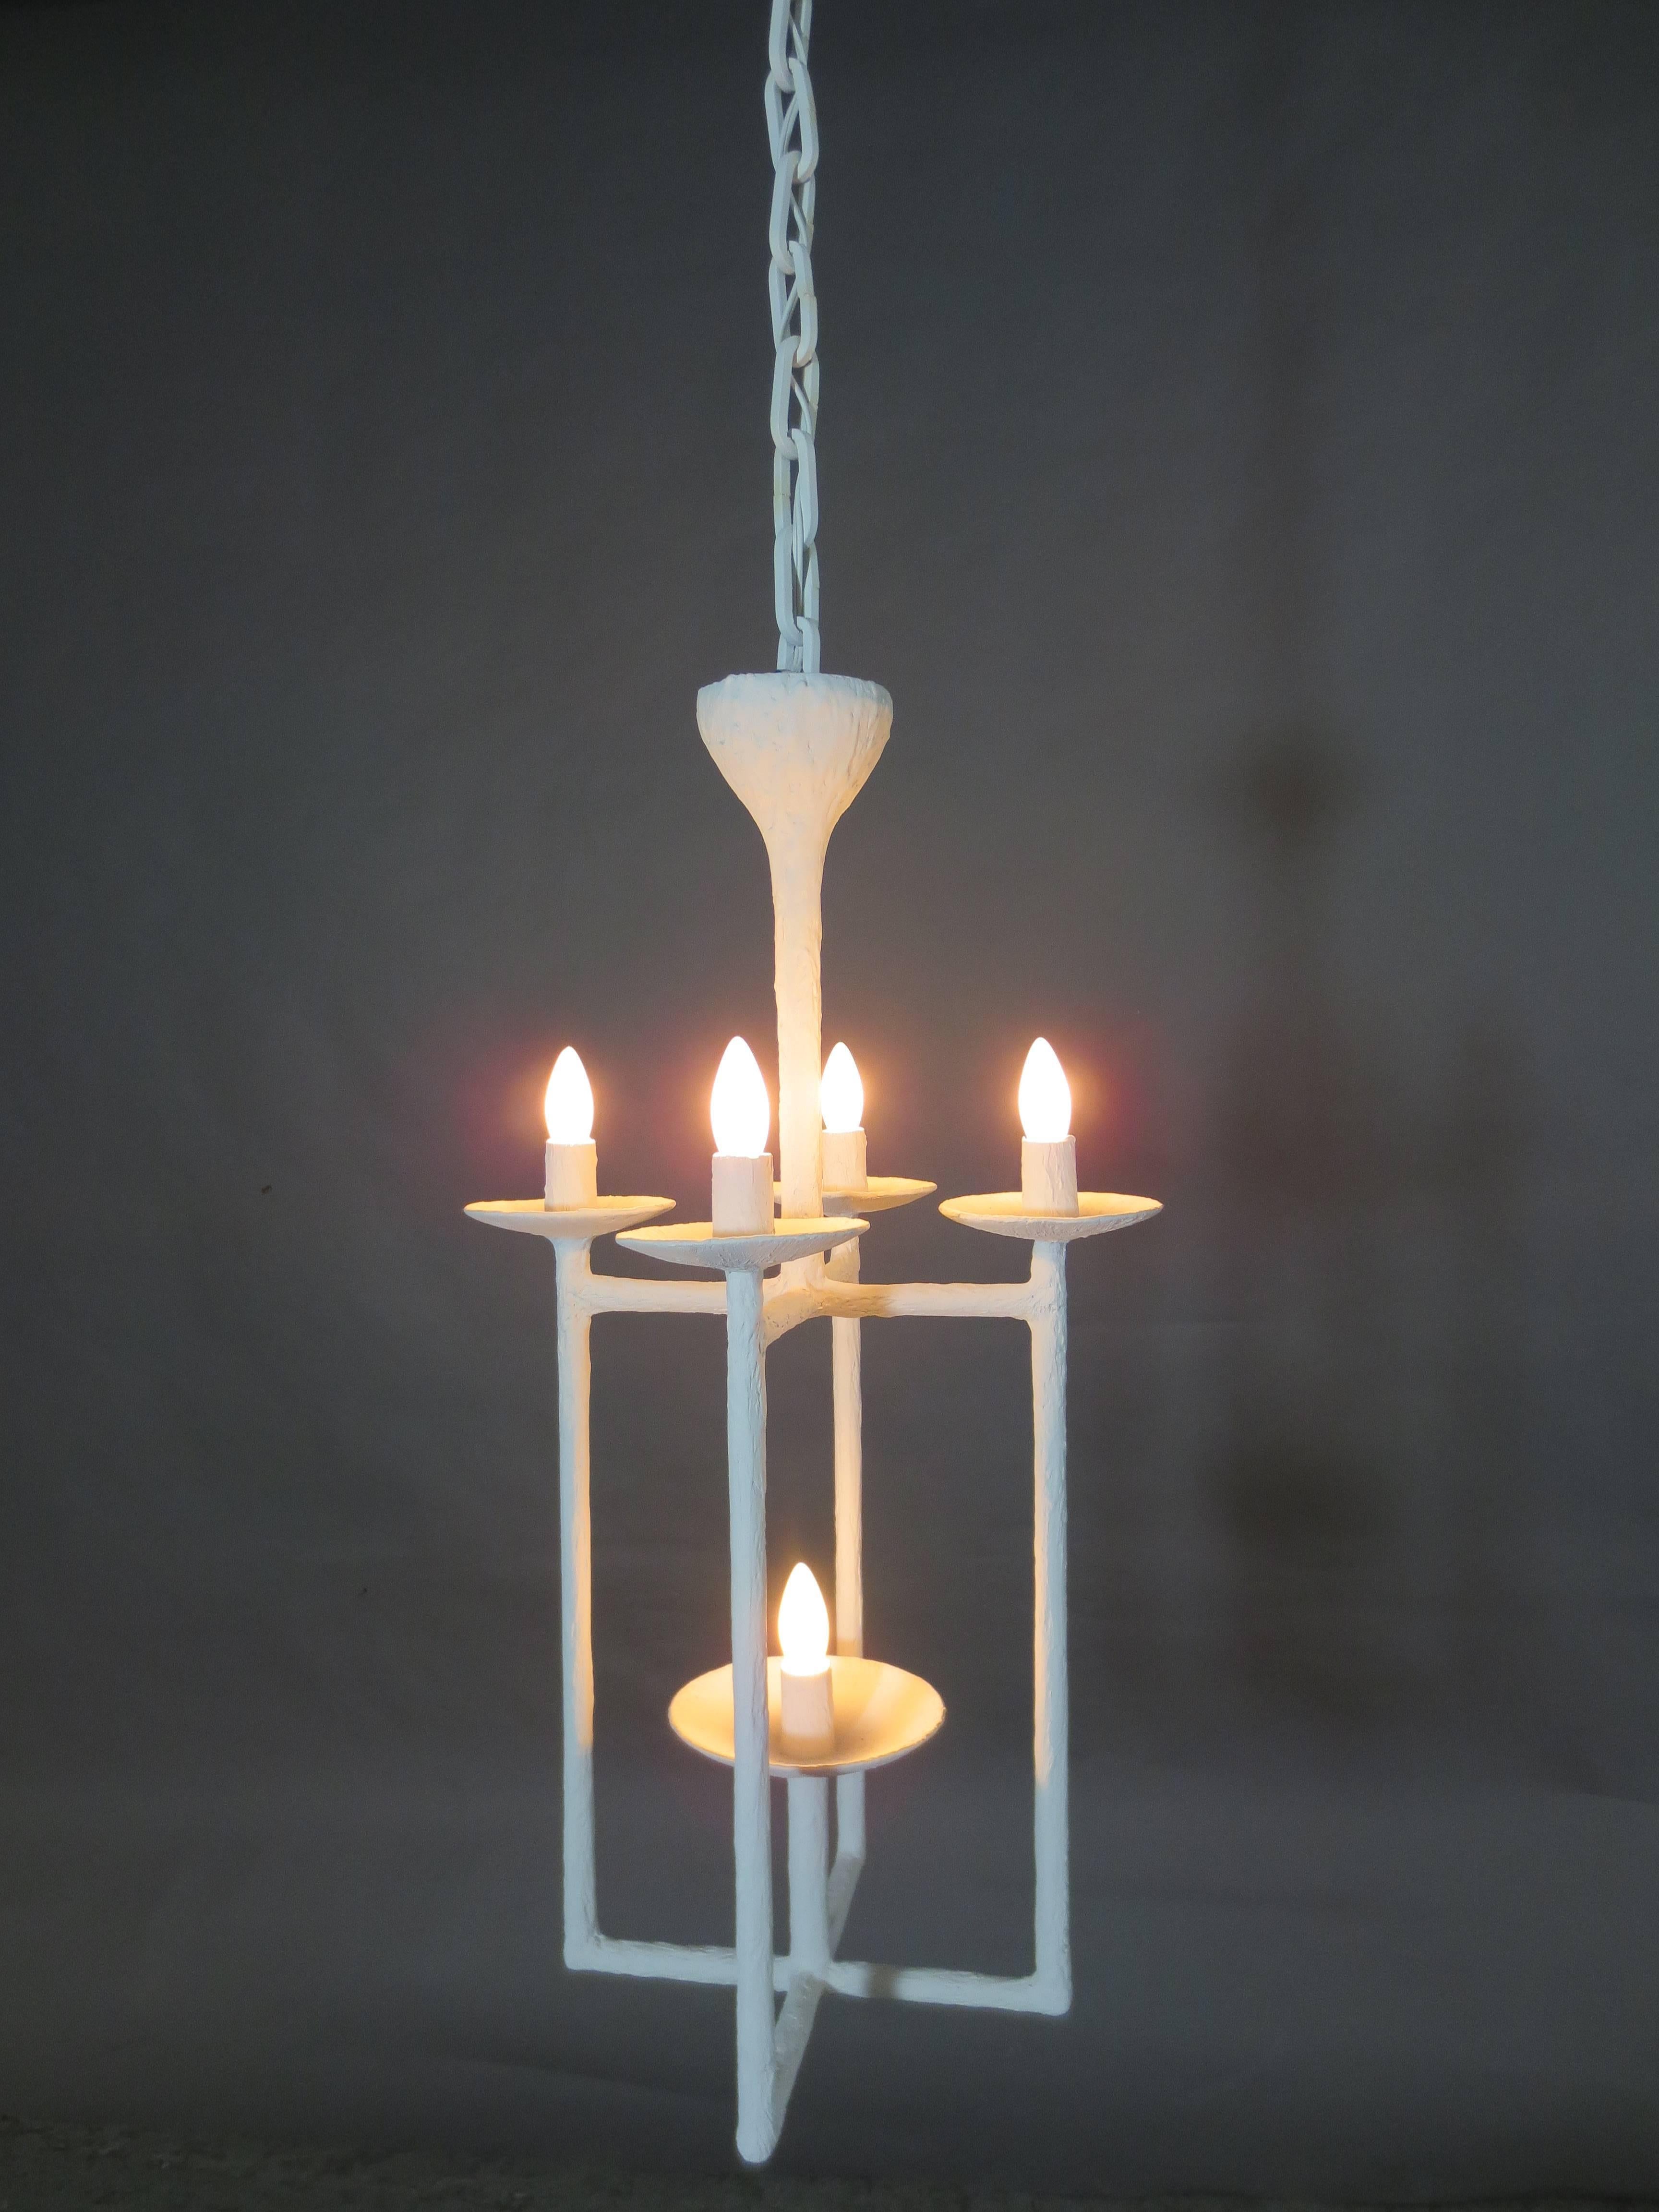 Lantern Chandelier in White Plaster.  Five bulbs, four above arms, one reaching from center on the bottom base. Can be made with custom chain lengths as pictured. All chandeliers are custom and made to order. Available in a variety of finishes. 